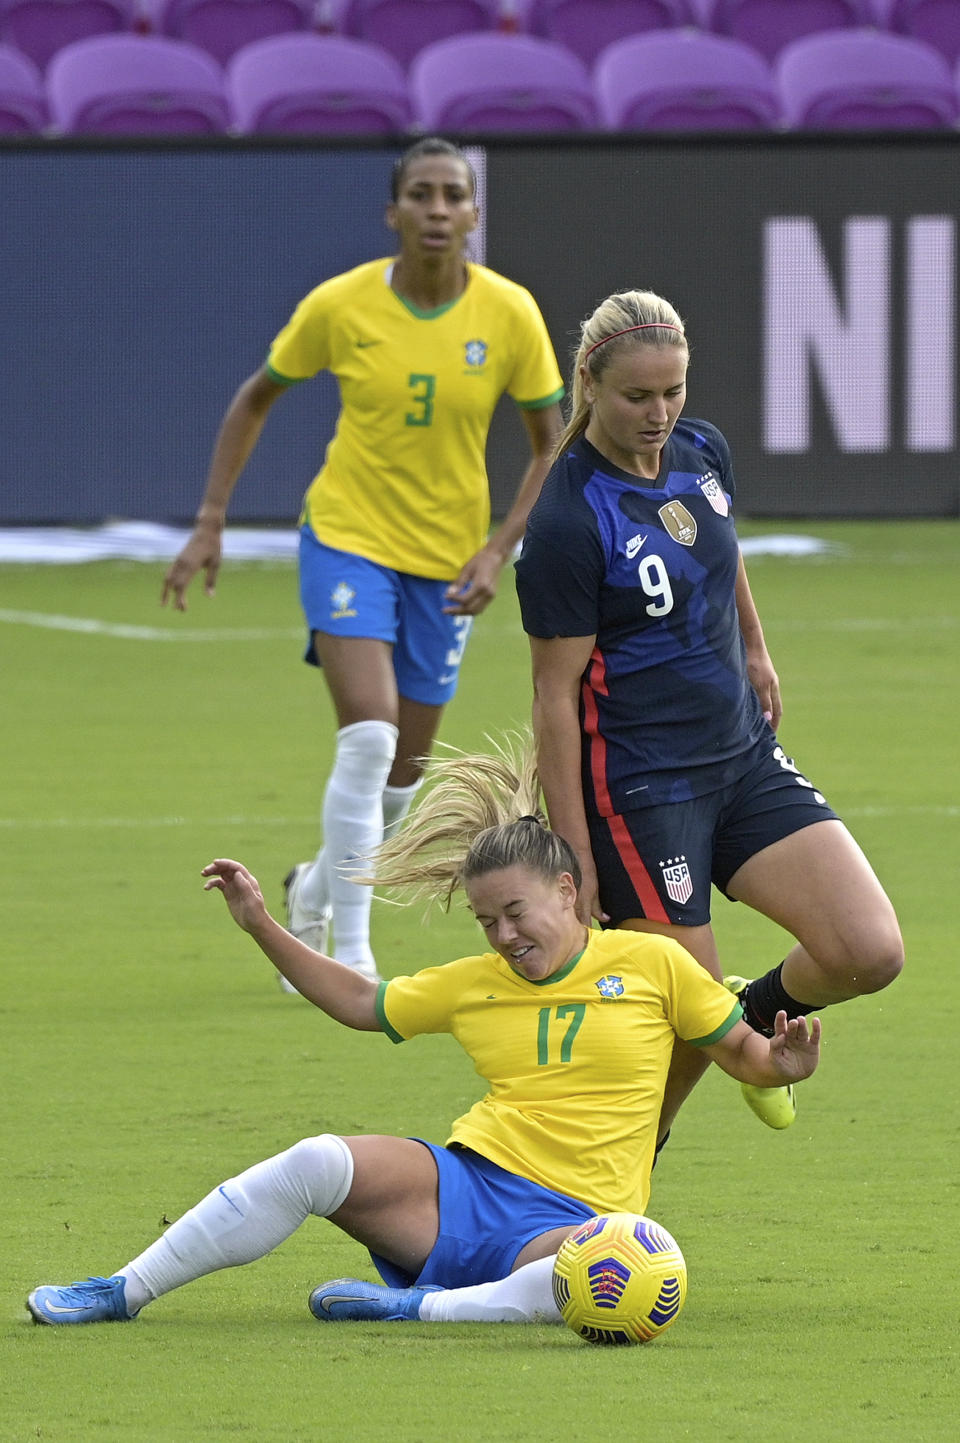 Brazil midfielder Andressinha (17) and United States midfielder Lindsey Horan (9) collide while competing for a ball during the first half of a SheBelieves Cup women's soccer match, Sunday, Feb. 21, 2021, in Orlando, Fla. (AP Photo/Phelan M. Ebenhack)